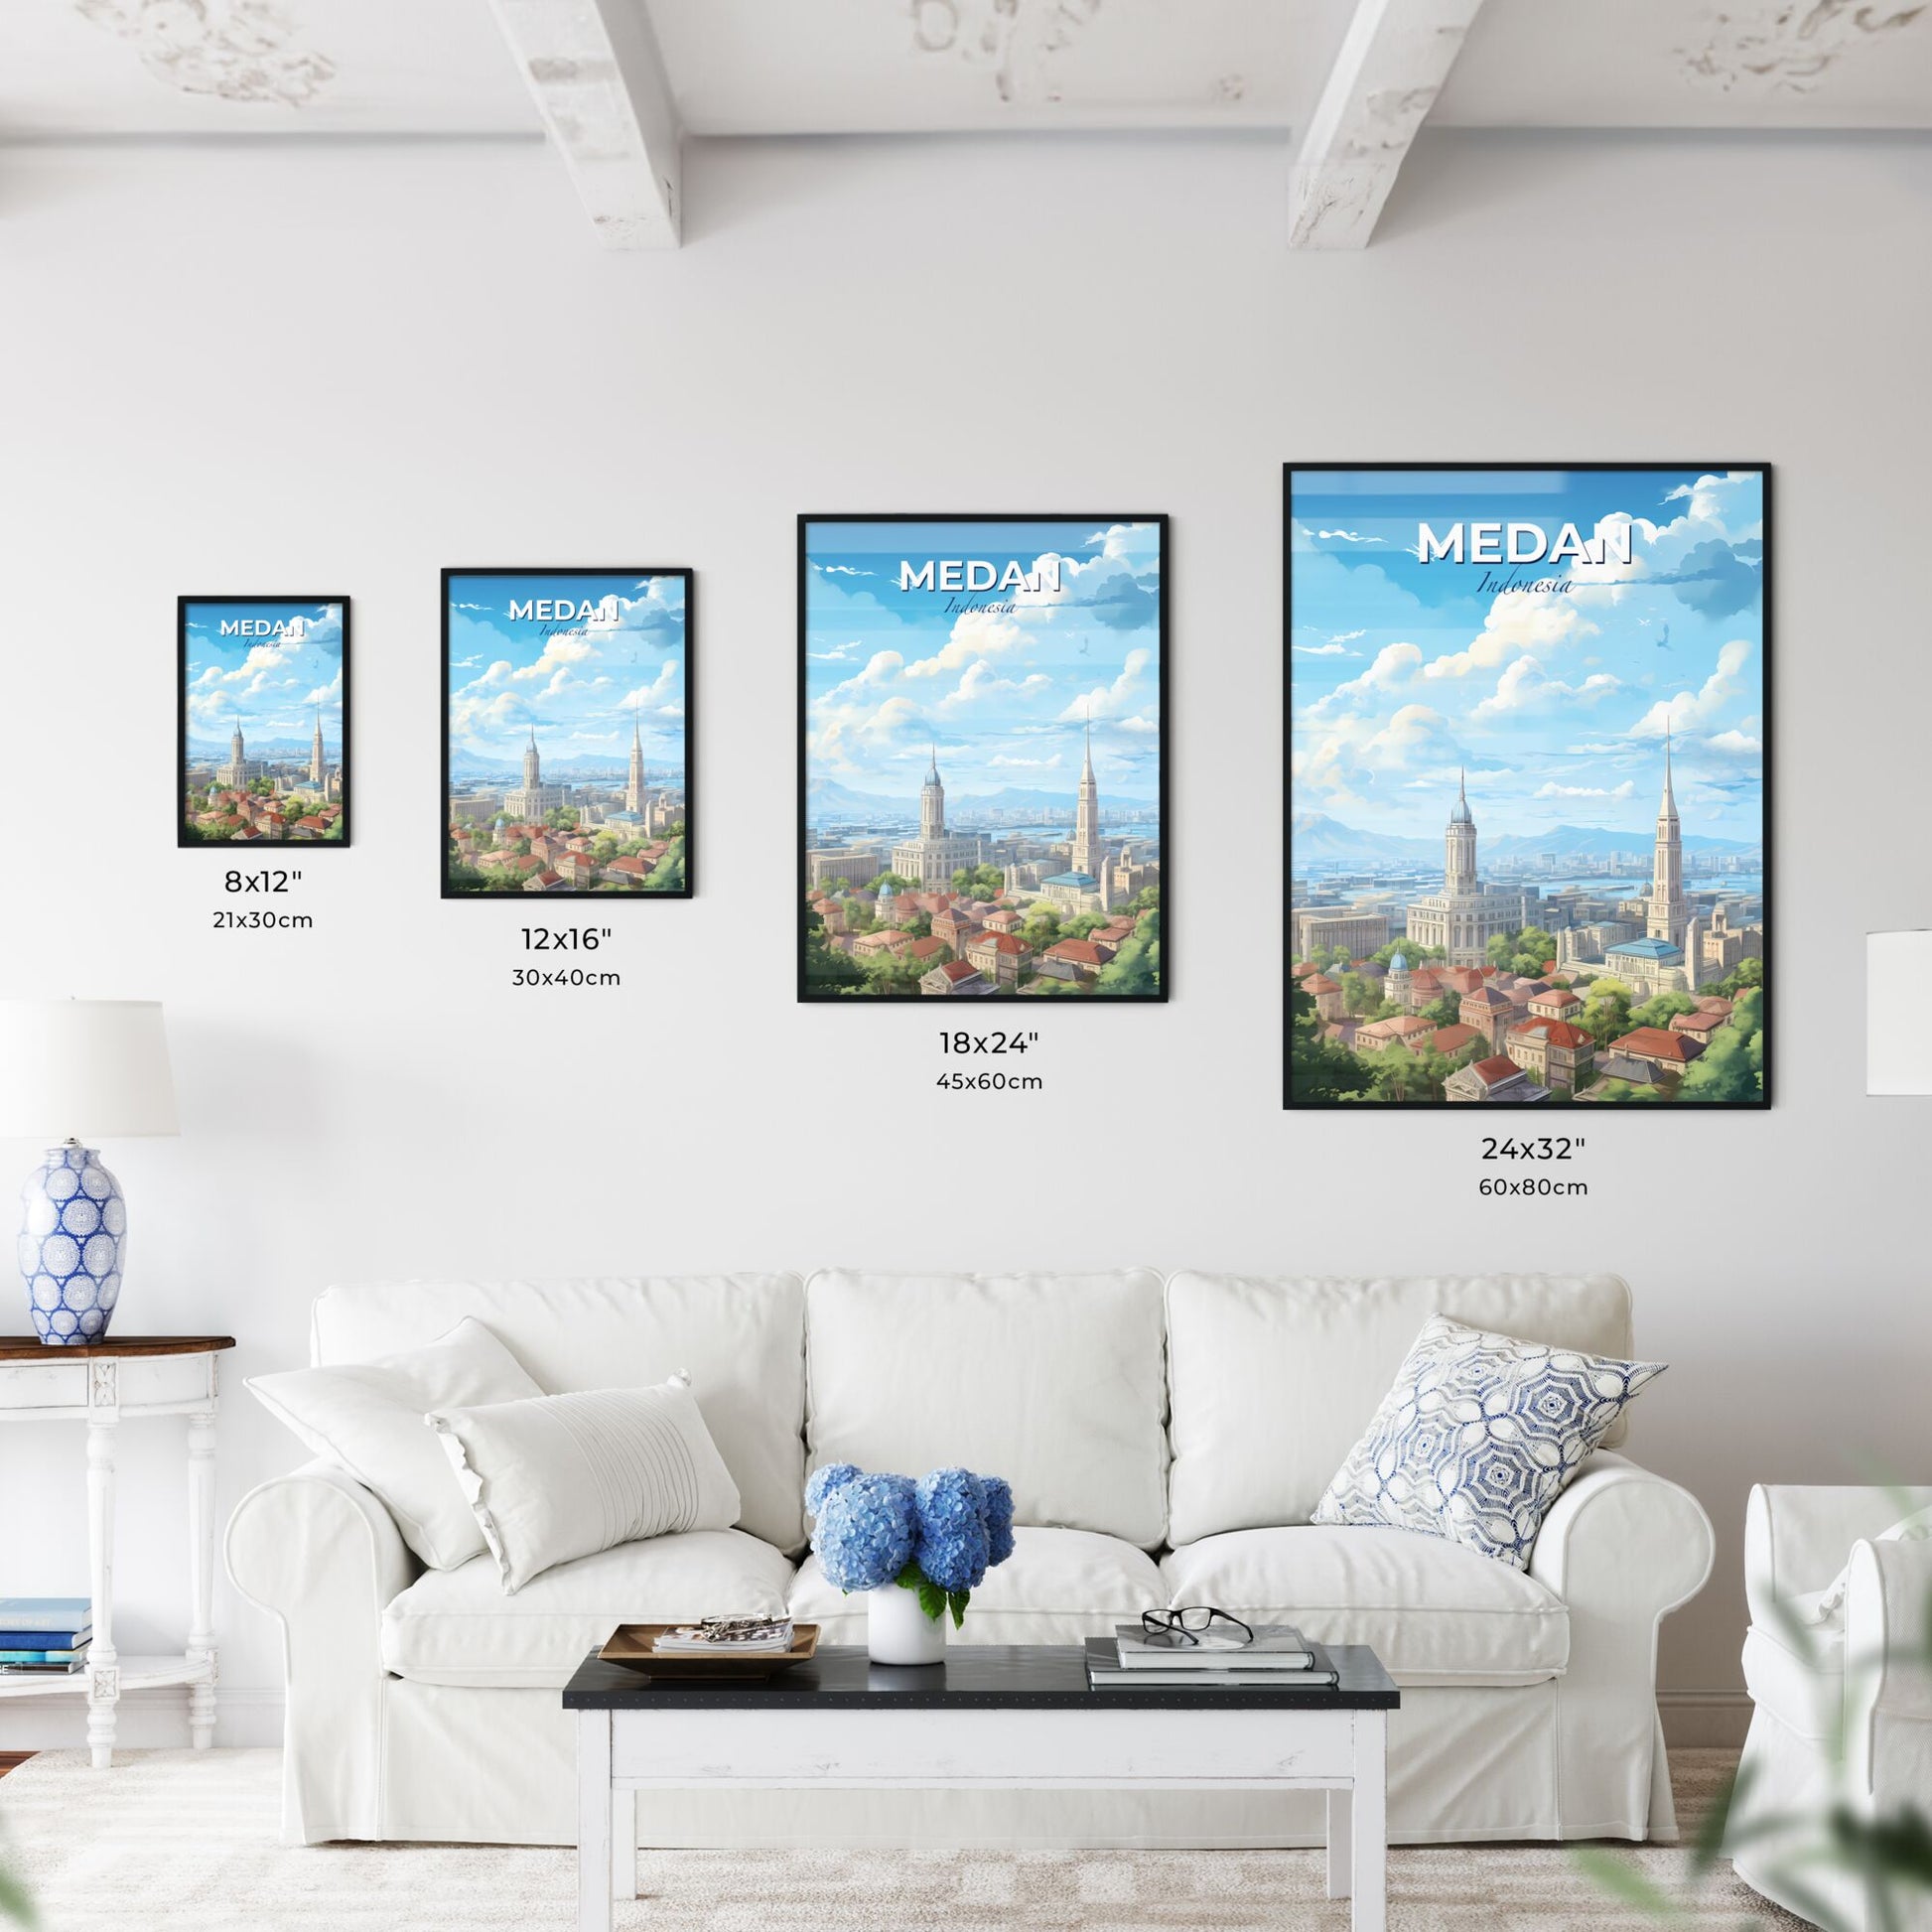 Medan Indonesia Skyline - A City With Many Towers And Trees - Customizable Travel Gift